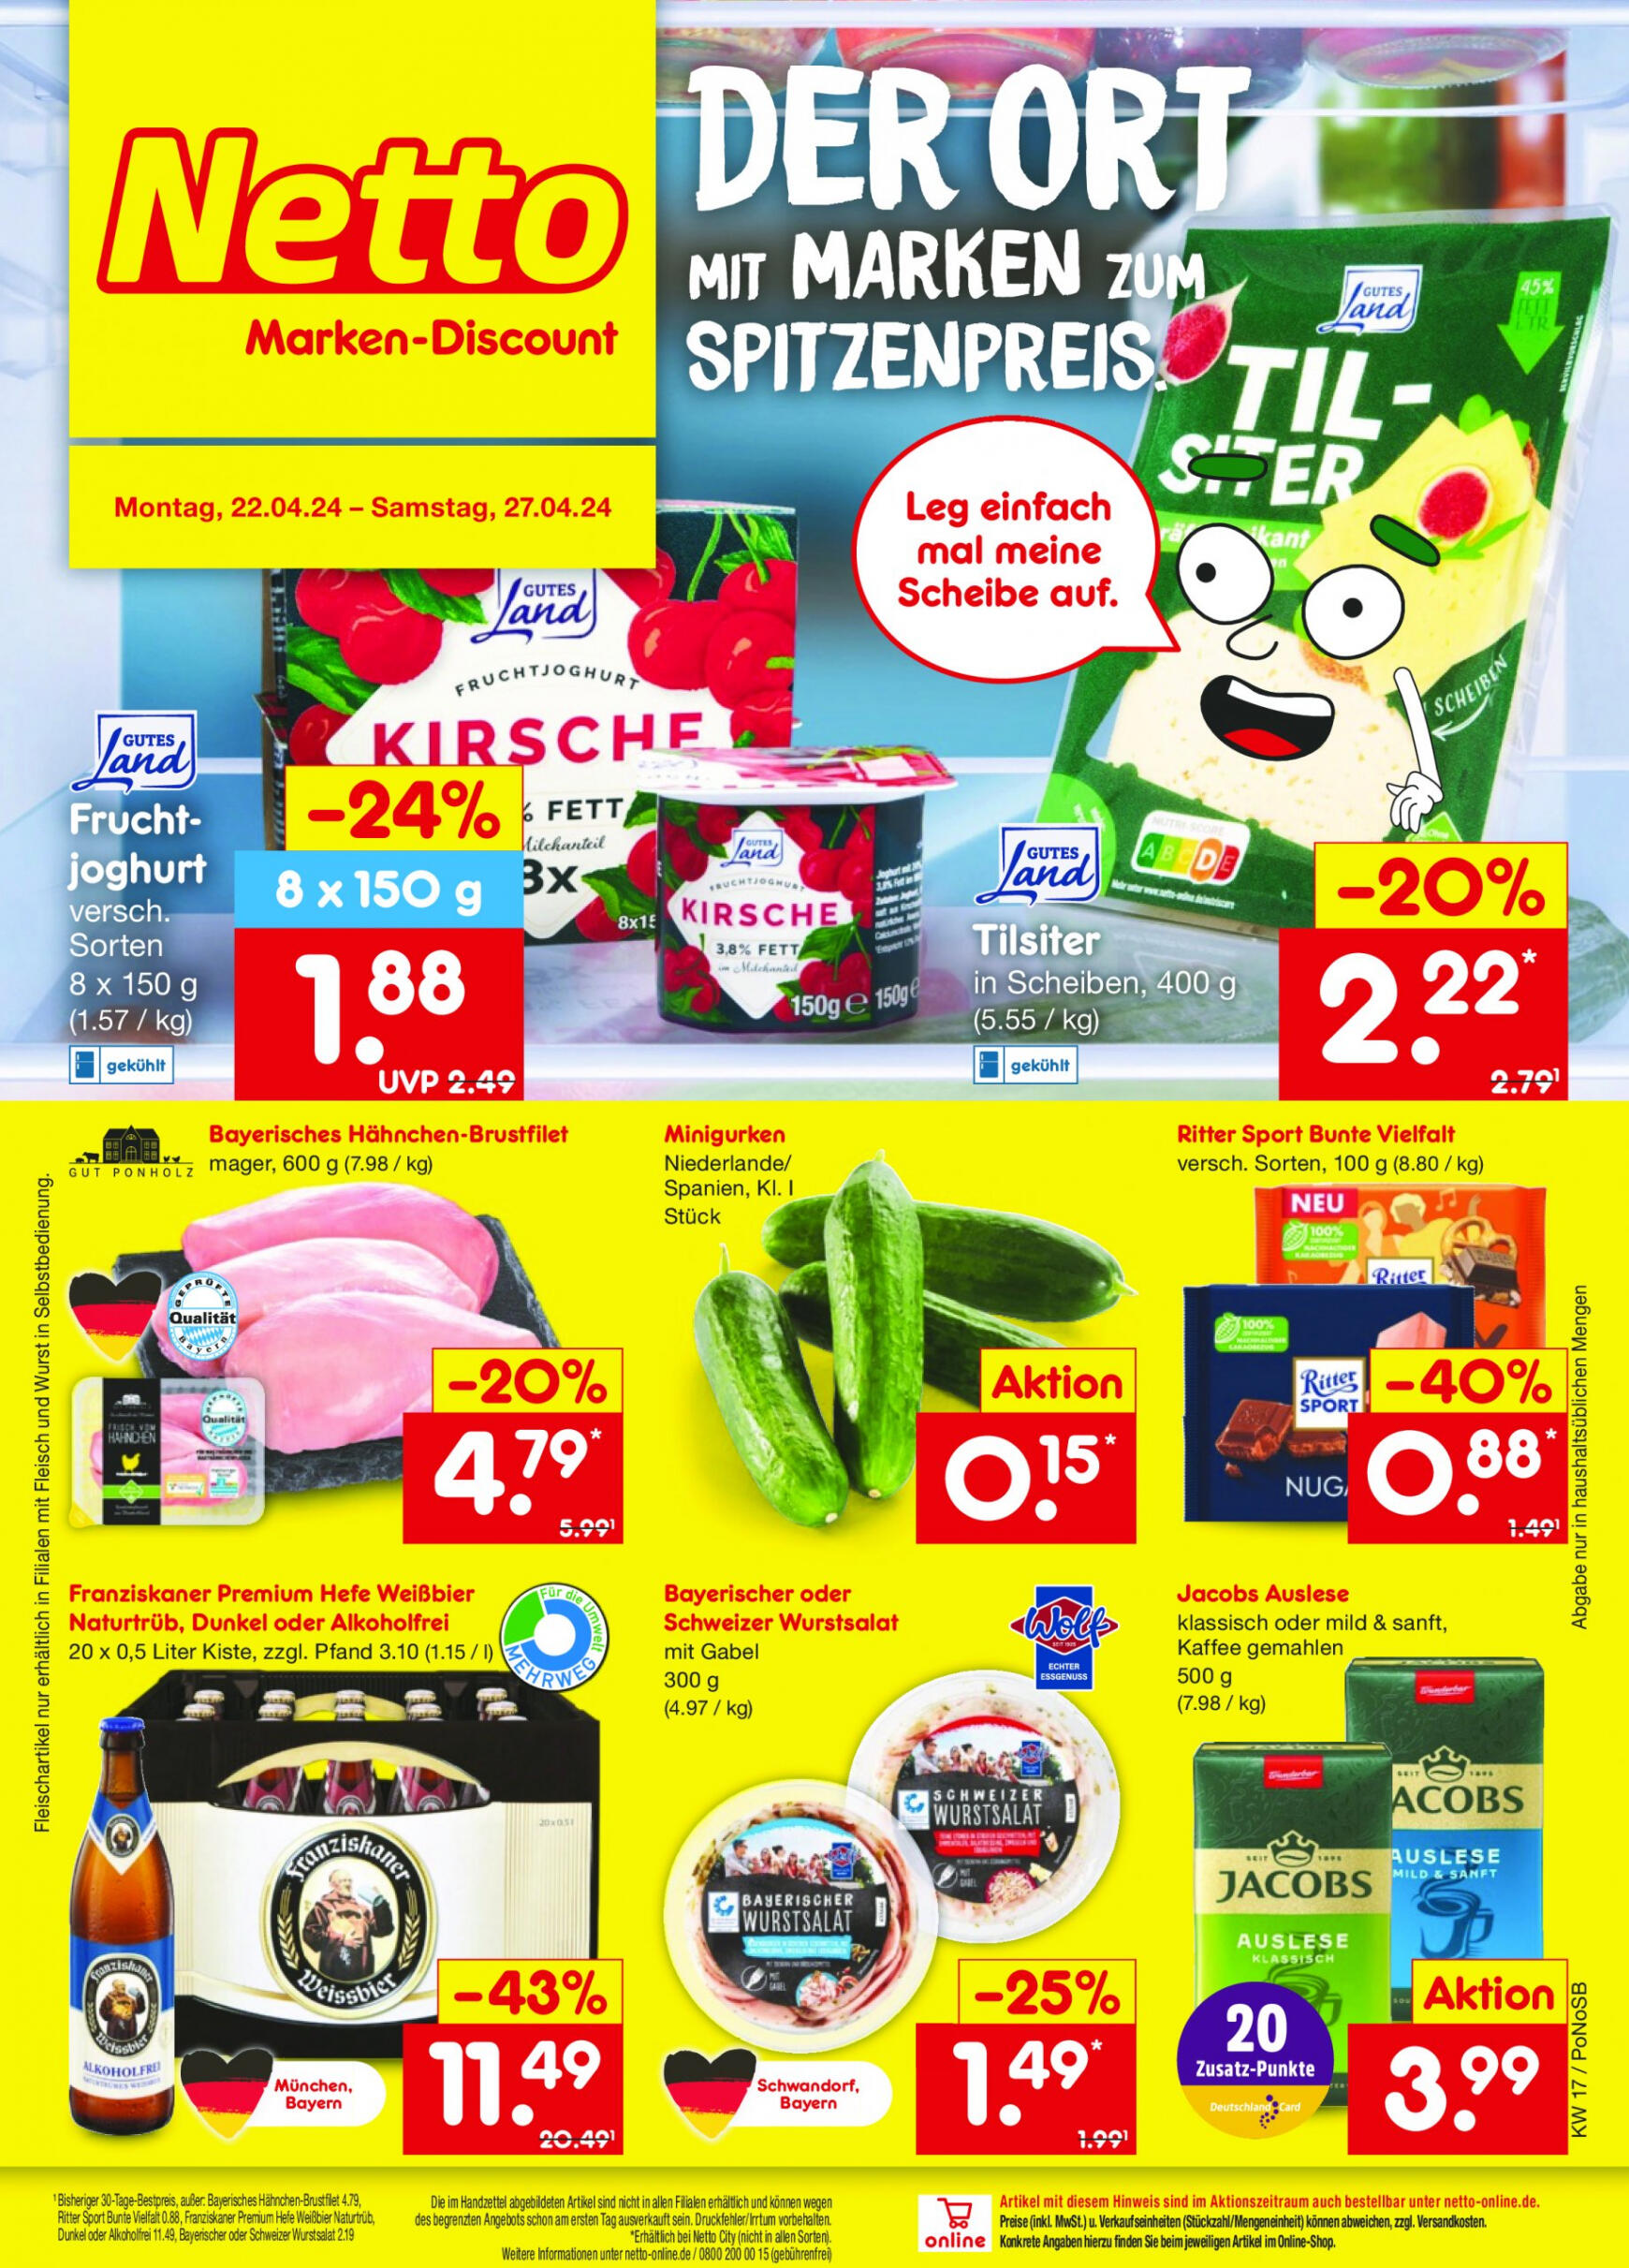 netto - Flyer Netto aktuell 22.04. - 27.04. - page: 1